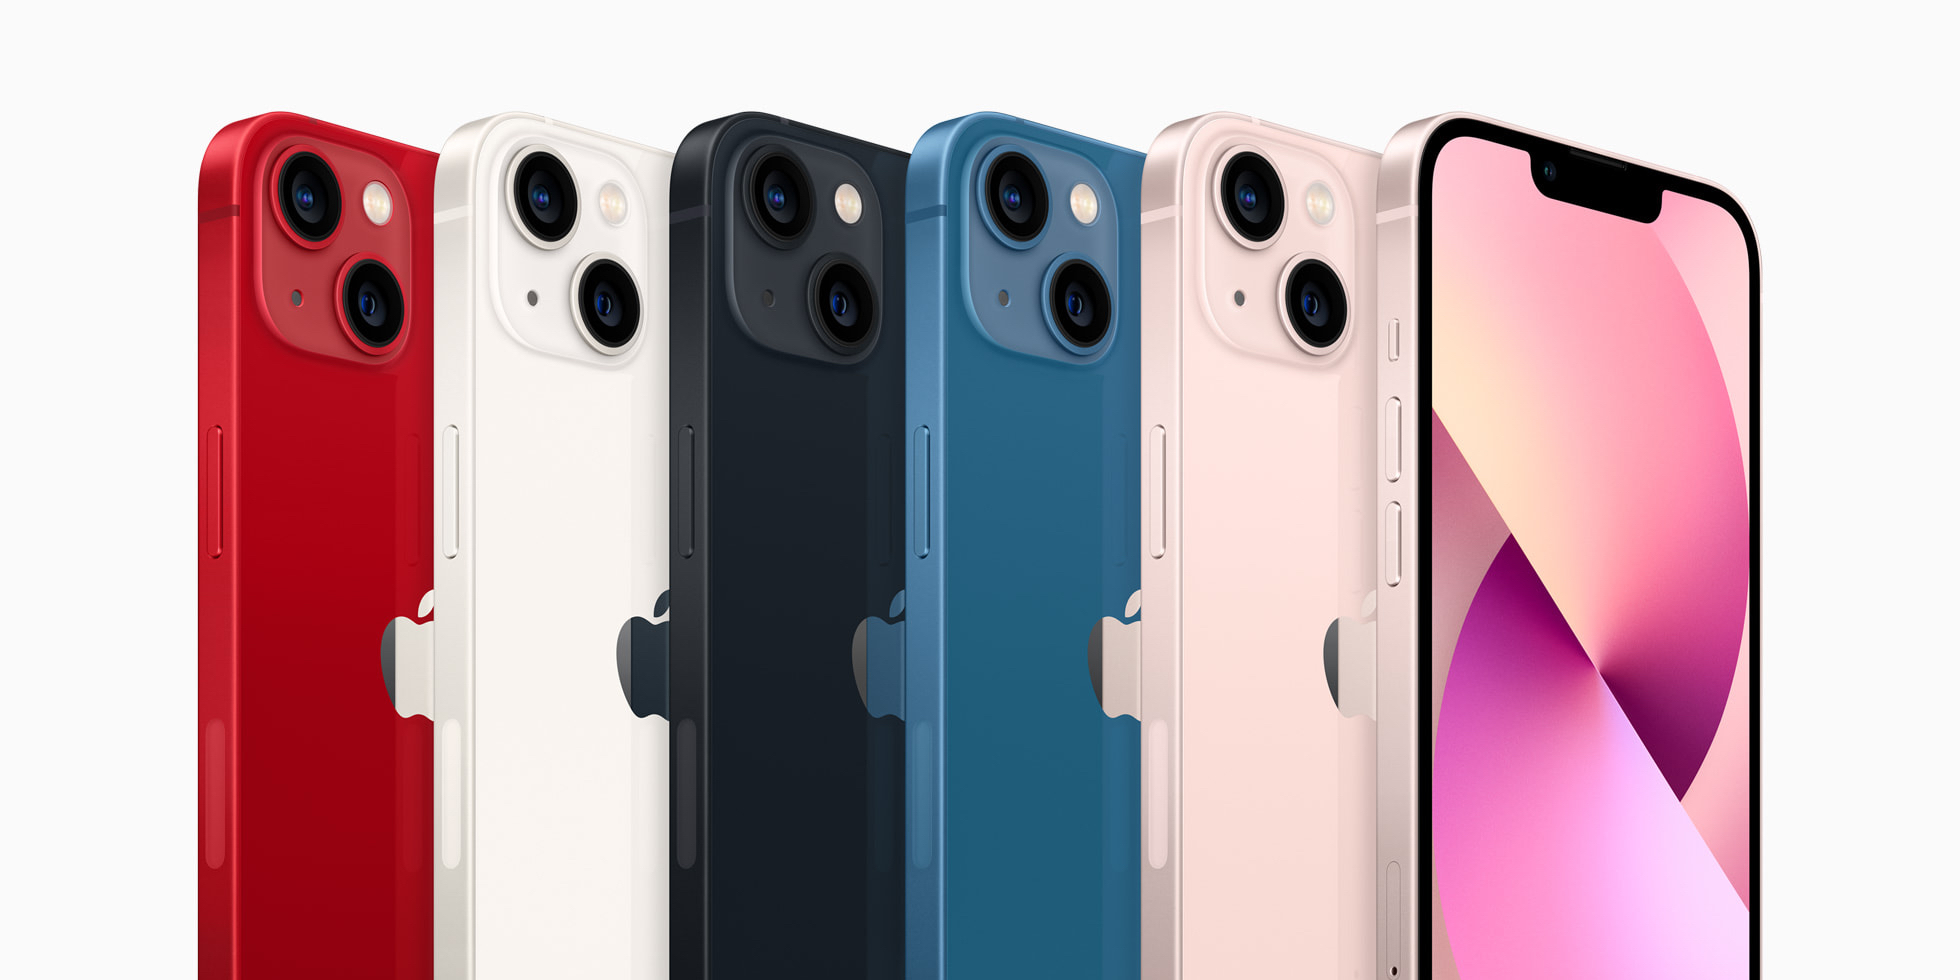 Poll: What's your favorite iPhone 13/iPhone 13 Pro color? - 9to5Mac